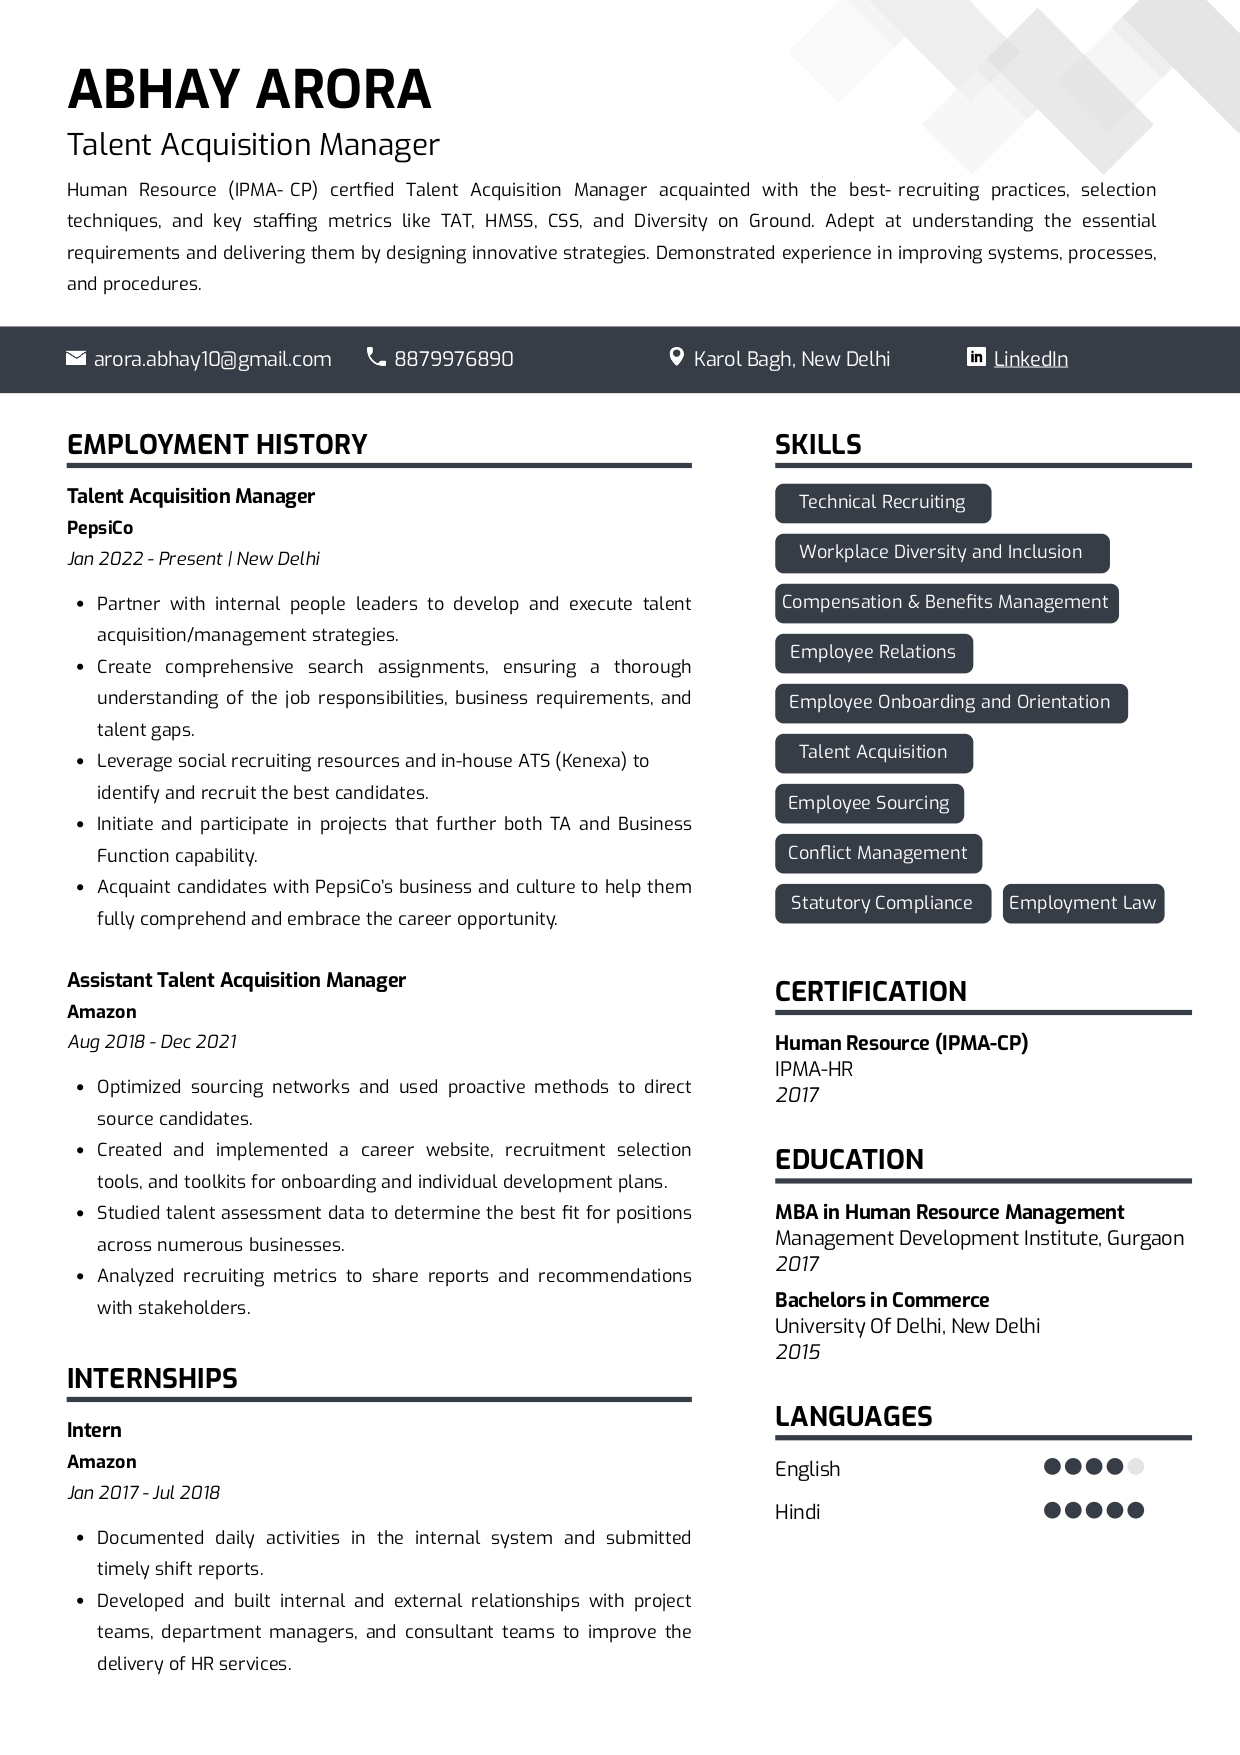 Sample Talent Acquisition Manager | Free Resume Templates & Samples on Resumod.co